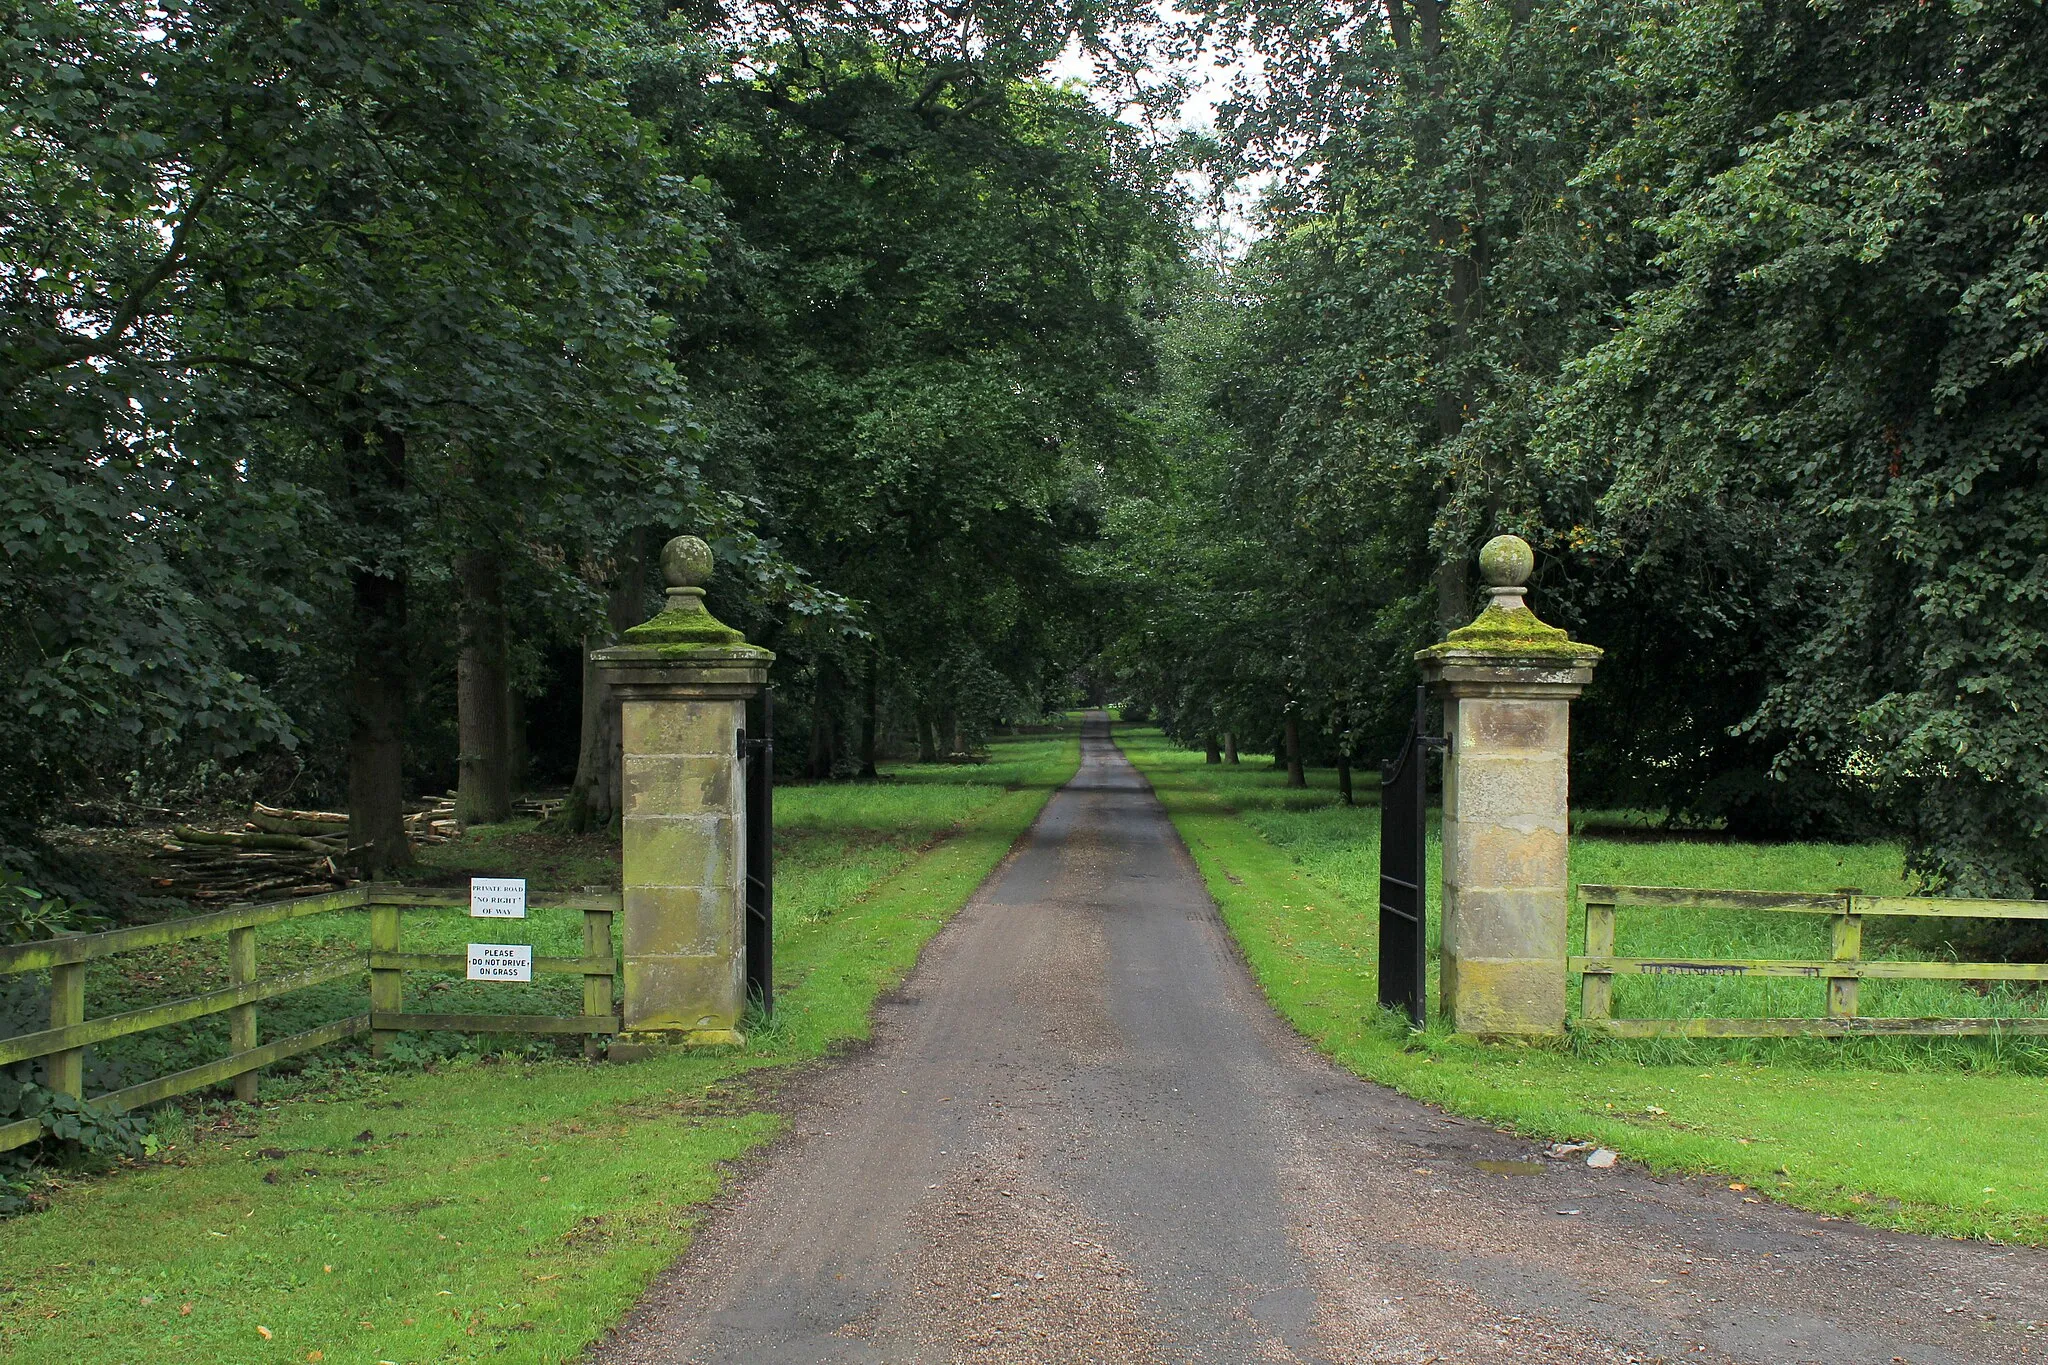 Photo showing: Gateway to Langton Hall in Little Langton in the North Riding of Yorkshire